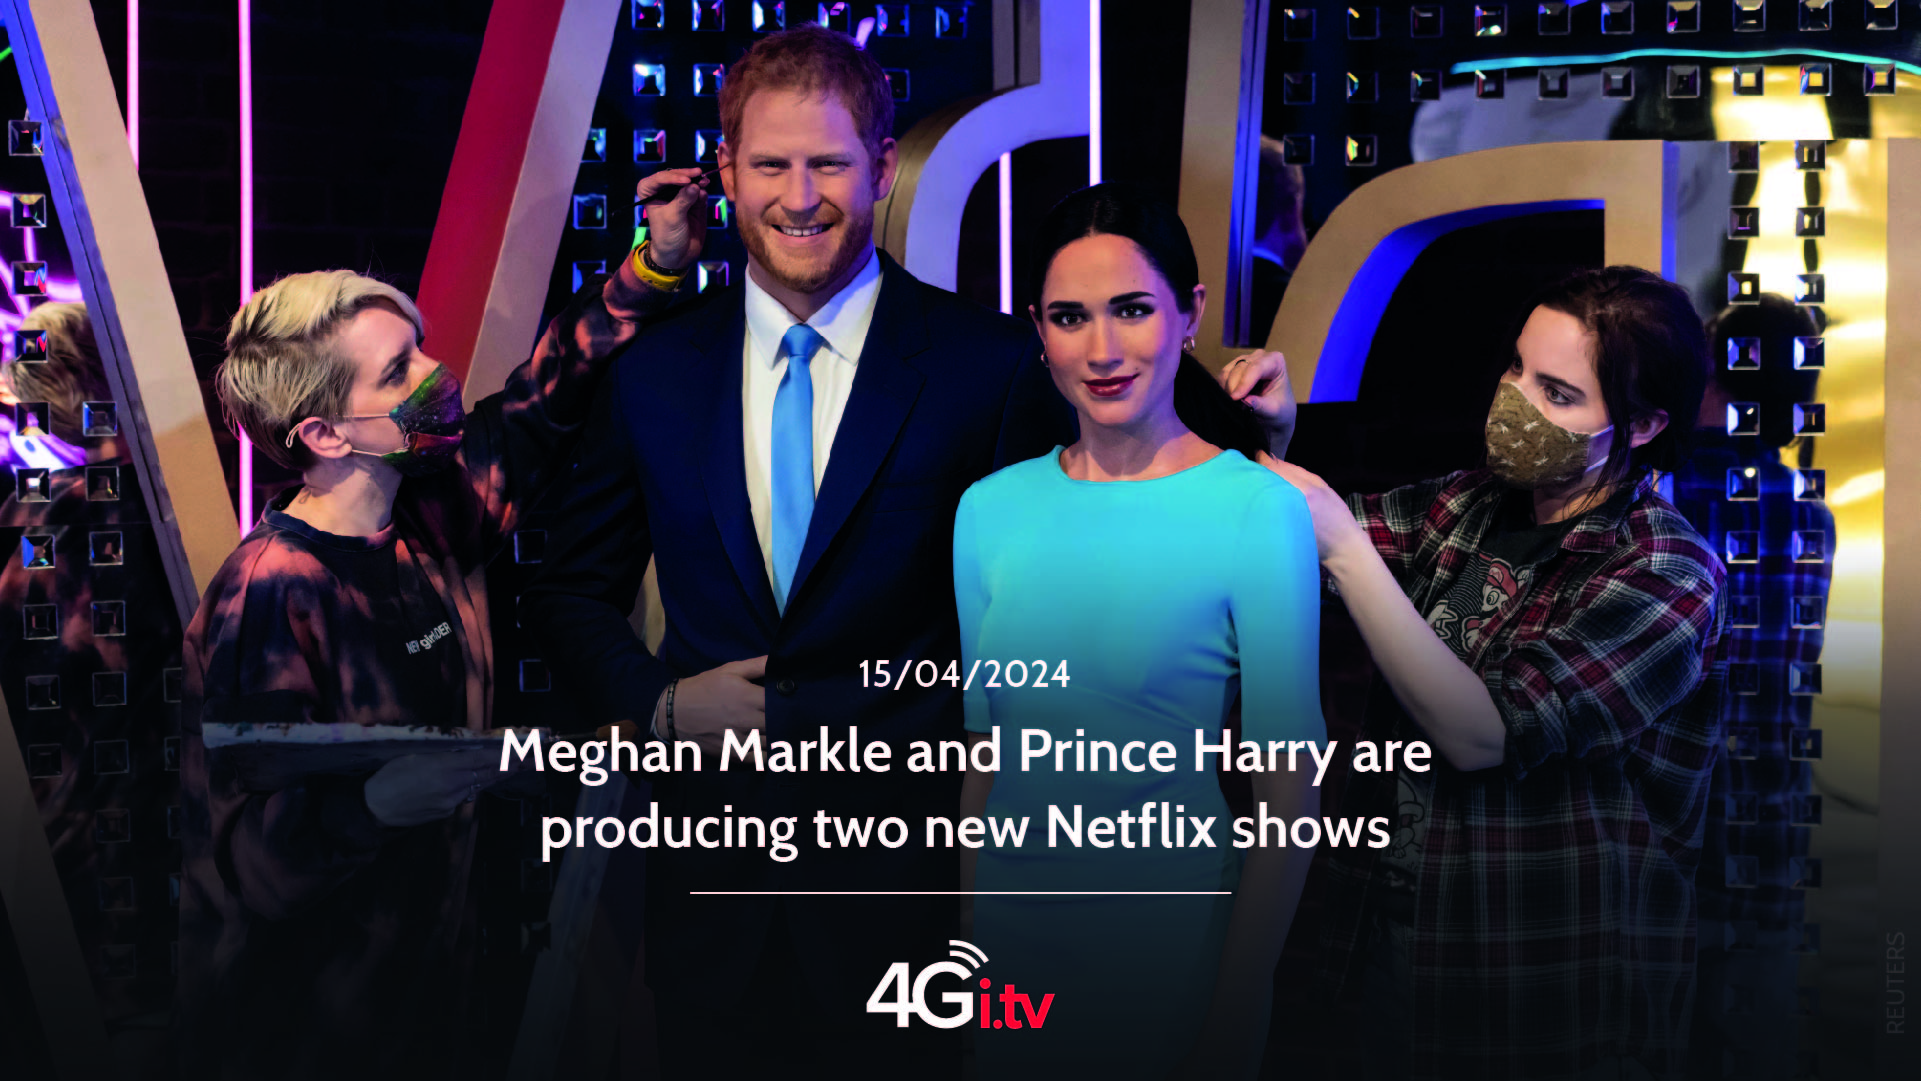 Lesen Sie mehr über den Artikel Meghan Markle and Prince Harry are producing two new Netflix shows